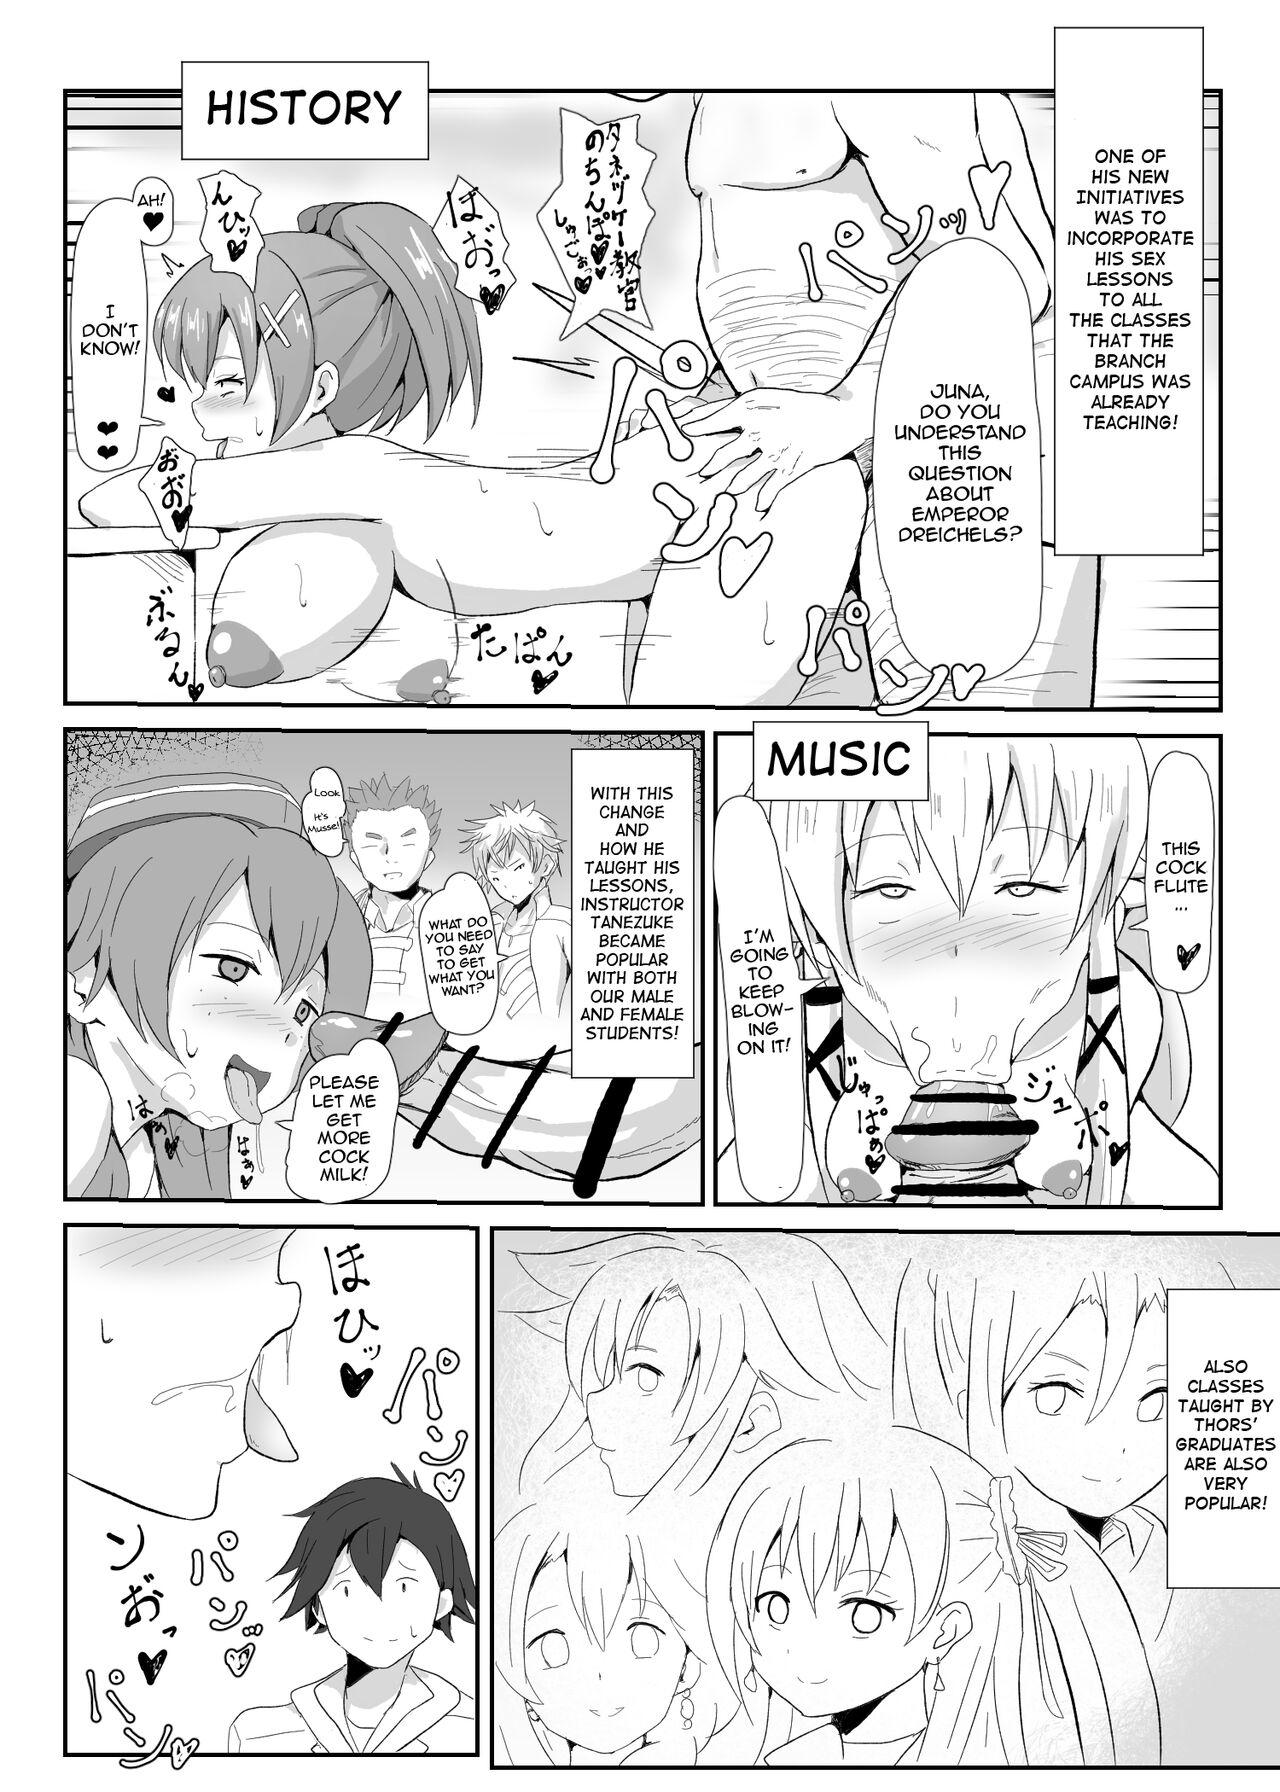 Workout NTR Hypnotic Academy - Prologue - The legend of heroes | eiyuu densetsu Boquete - Page 5